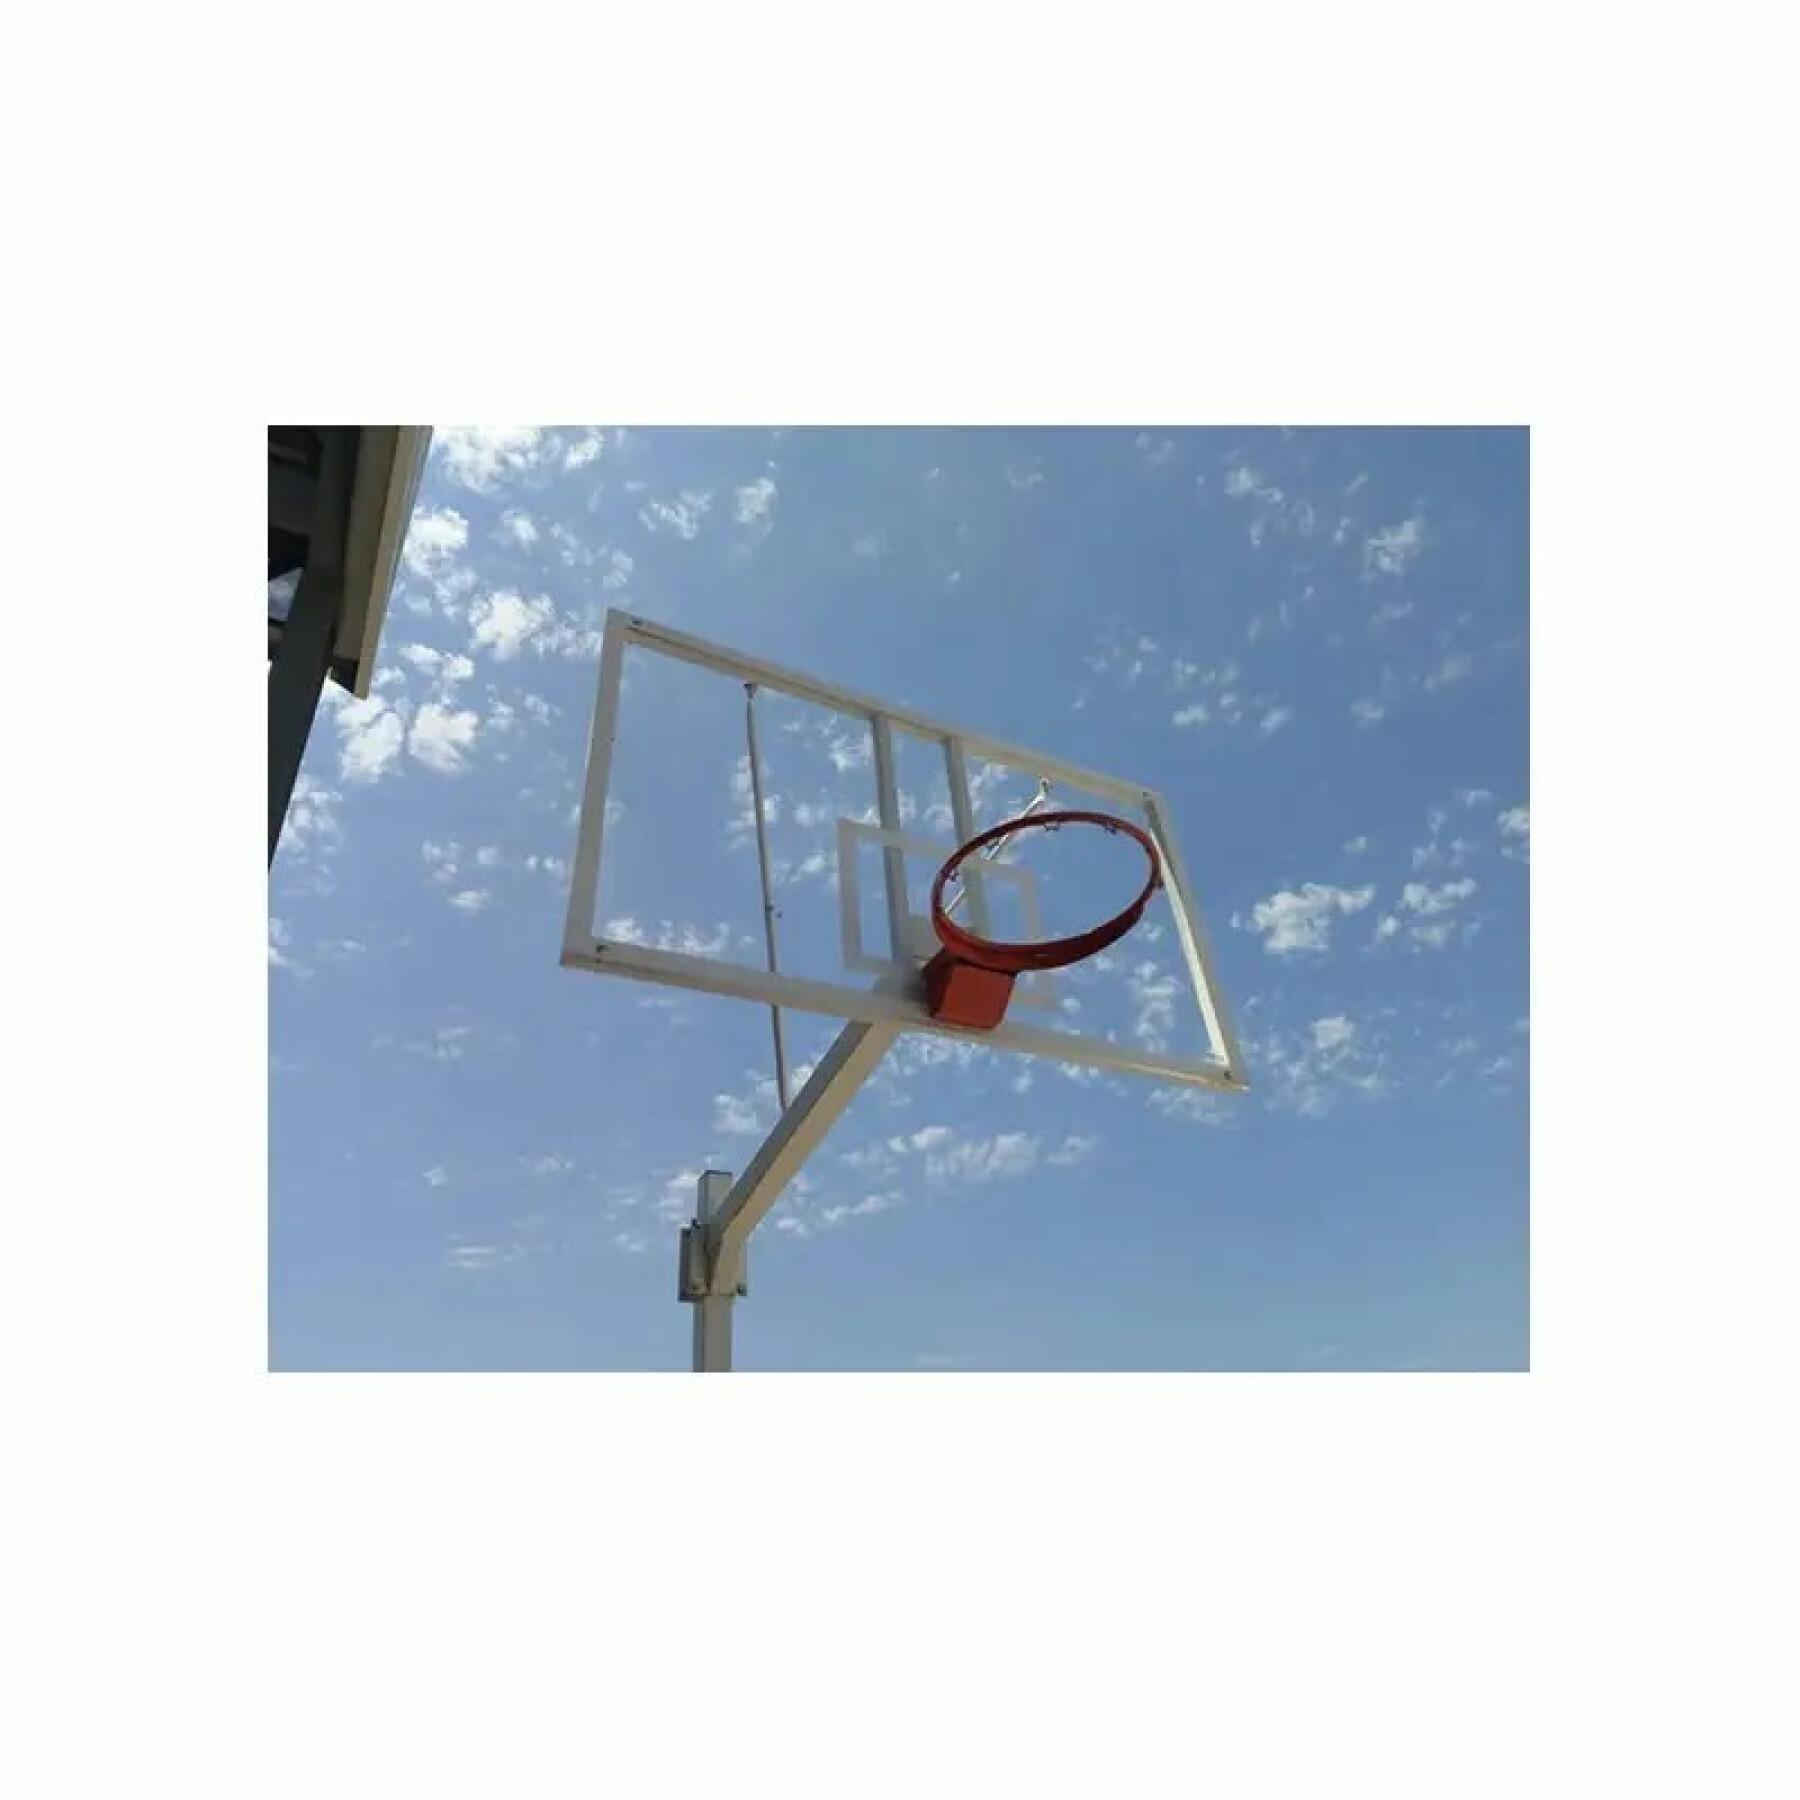 Set of 2 single-pipe basketball hoops with base for anchoring - no boards or hoops Softee Equipment Deluxe